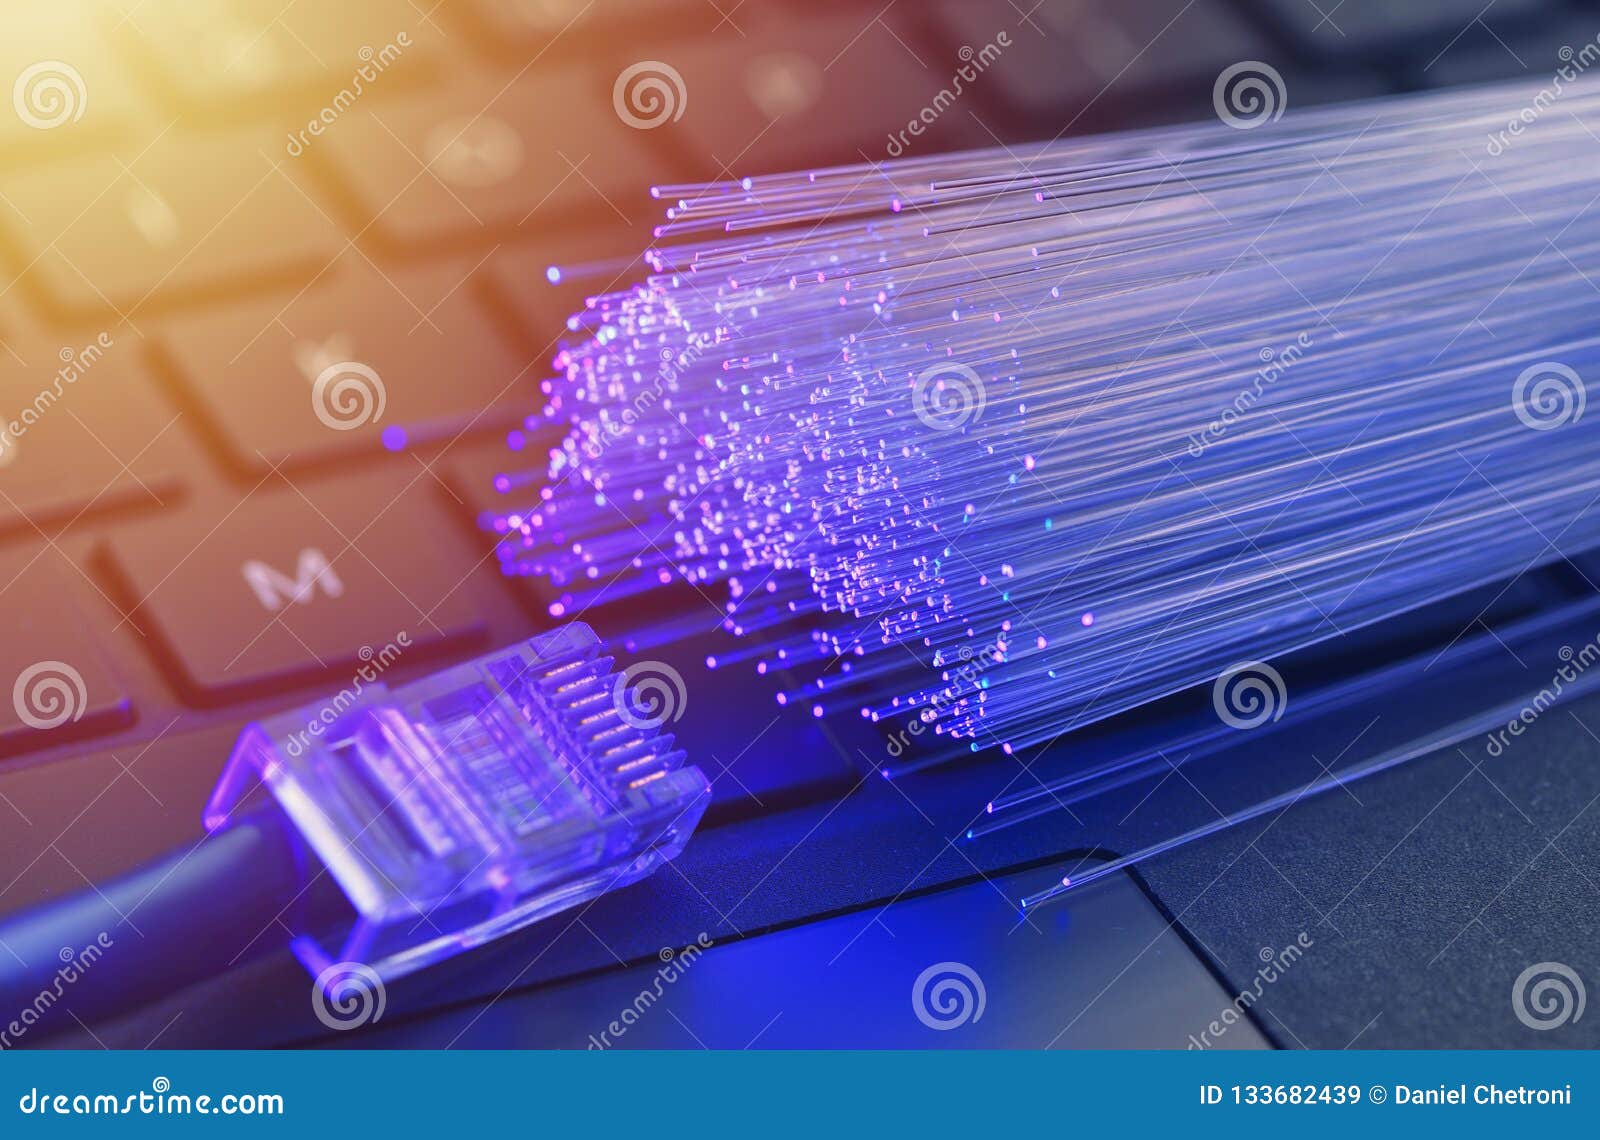 fiber optics in blue, close up with ethernet and keyboard background, warm lens flare